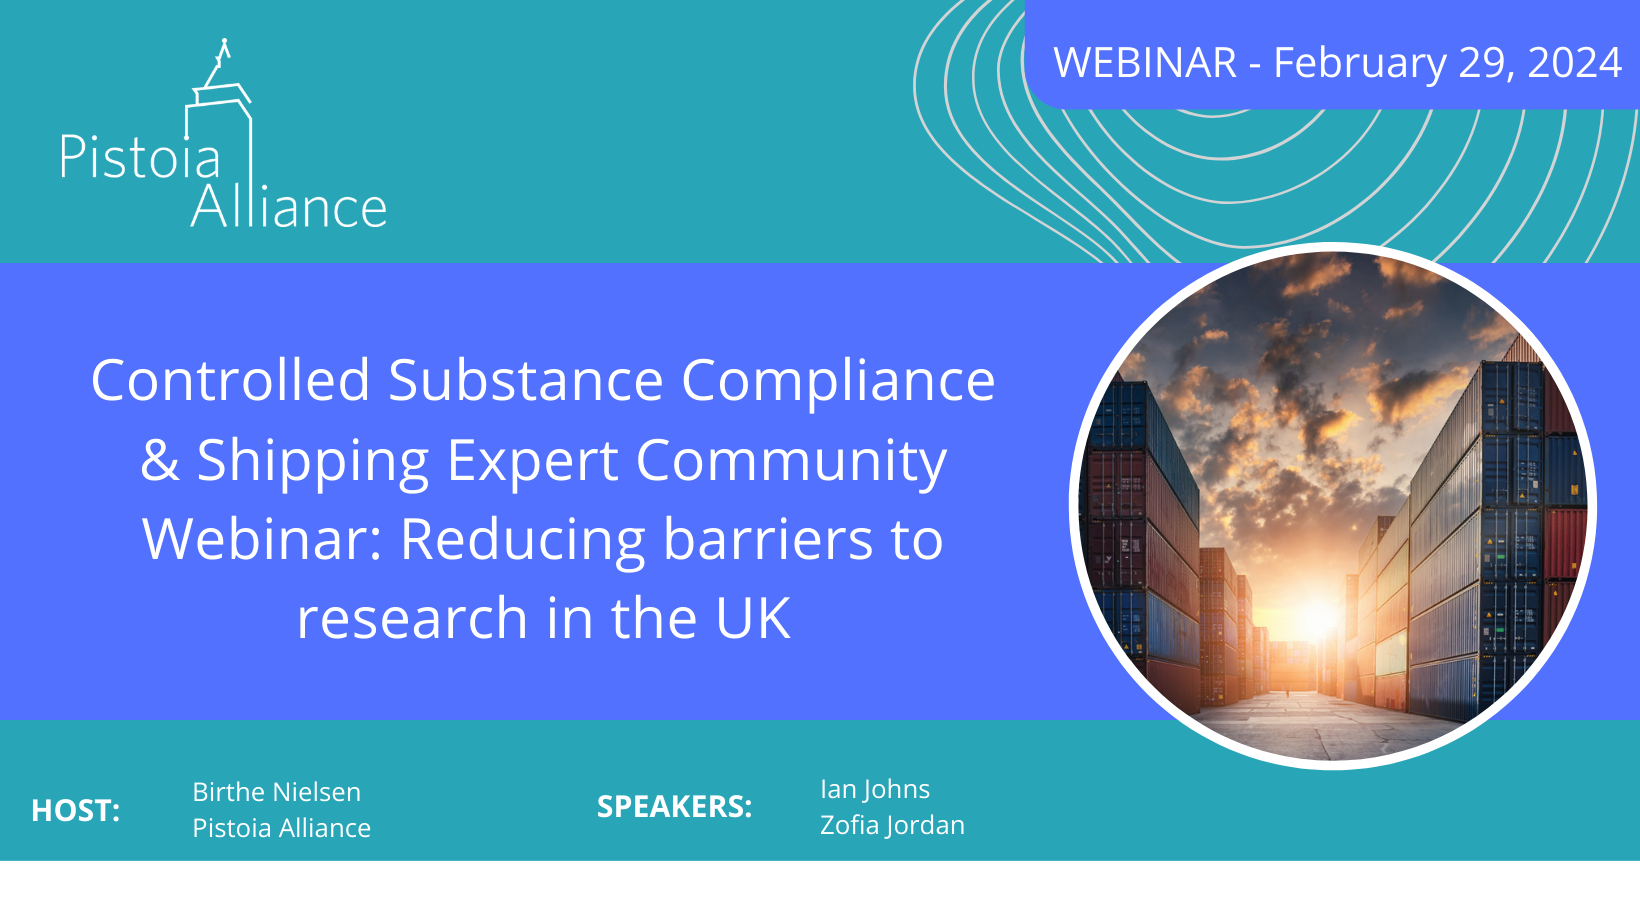 Controlled Substance Compliance and Shipping Expert Community Webinar: Reducing barriers to research in the UK